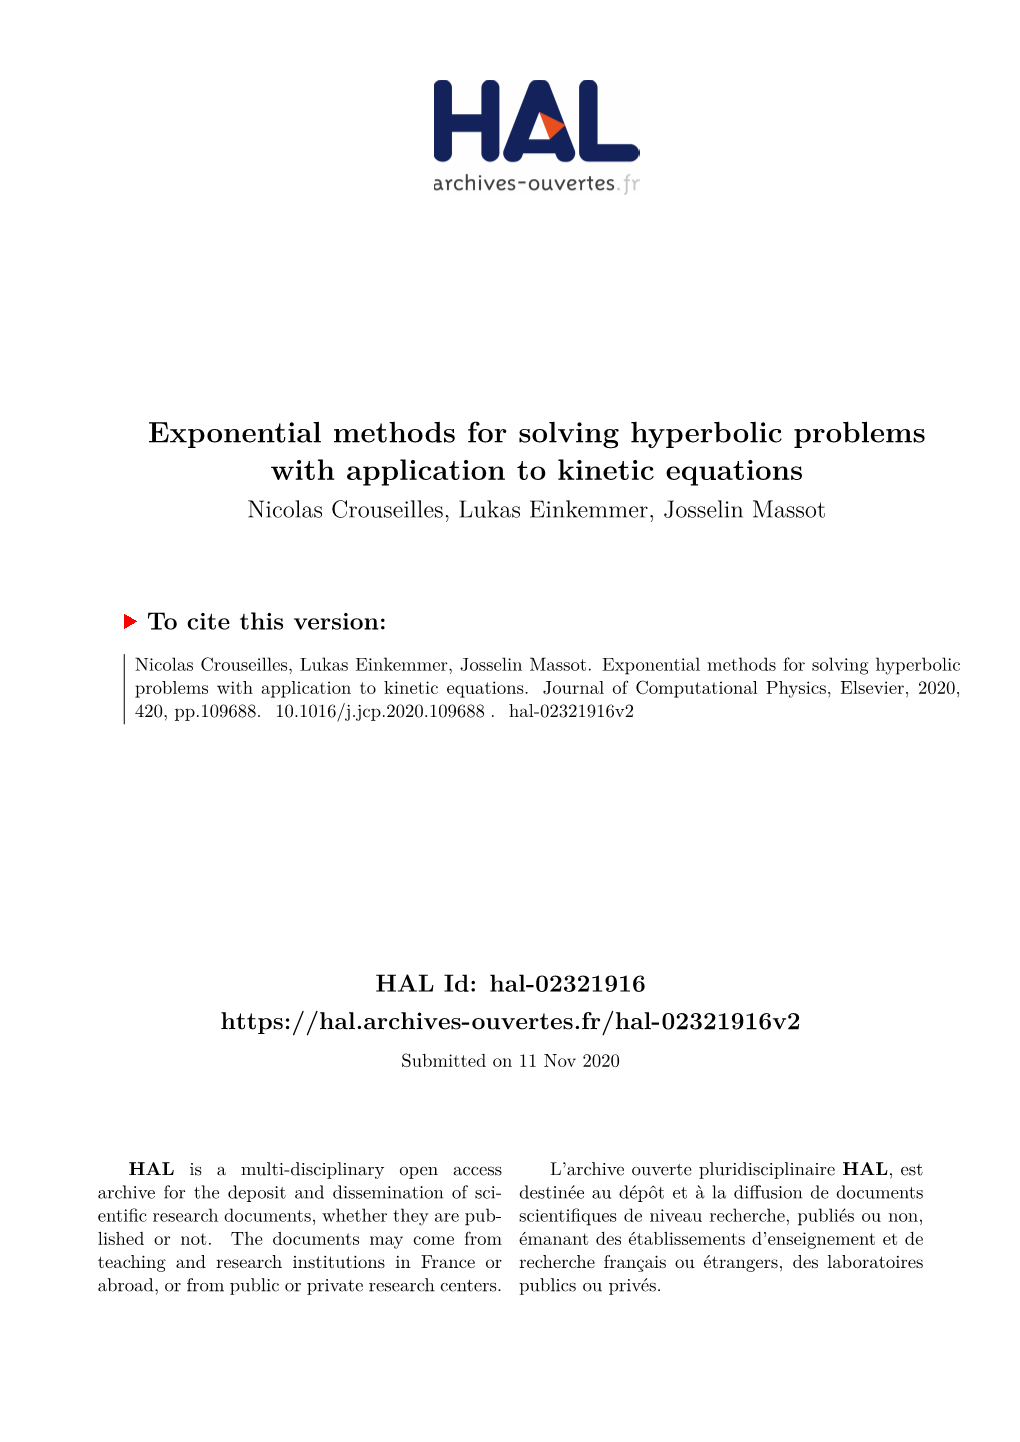 Exponential Methods for Solving Hyperbolic Problems with Application to Kinetic Equations Nicolas Crouseilles, Lukas Einkemmer, Josselin Massot